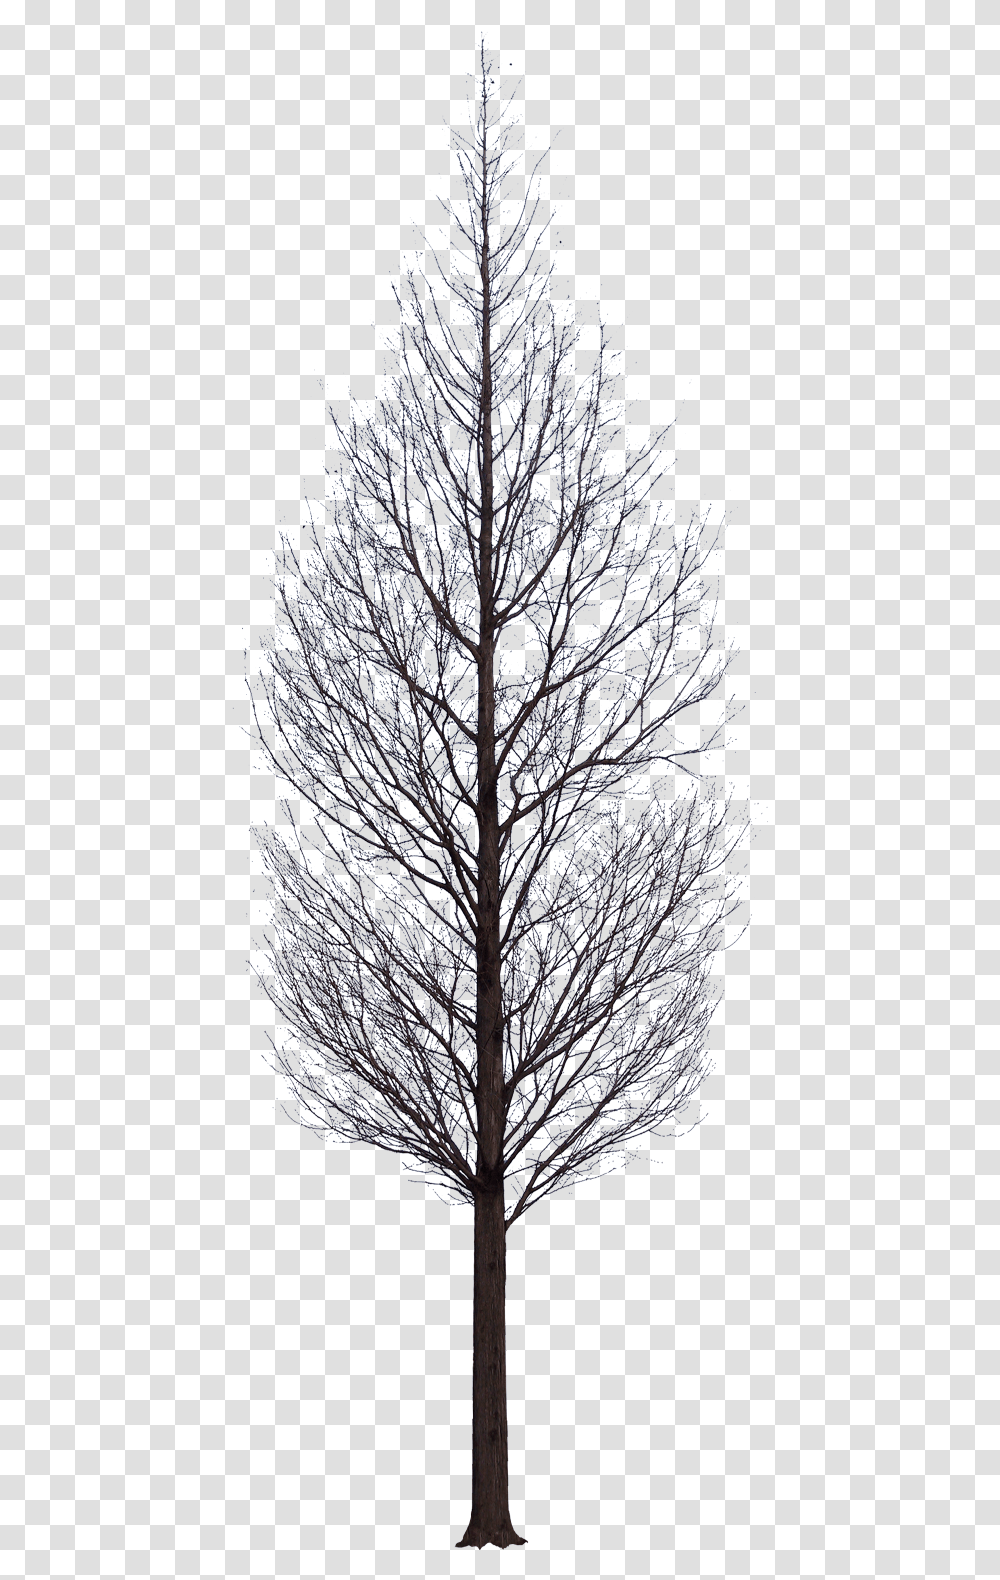 Tree Photoshop Tree Black, Plant, Nature, Ice, Outdoors Transparent Png